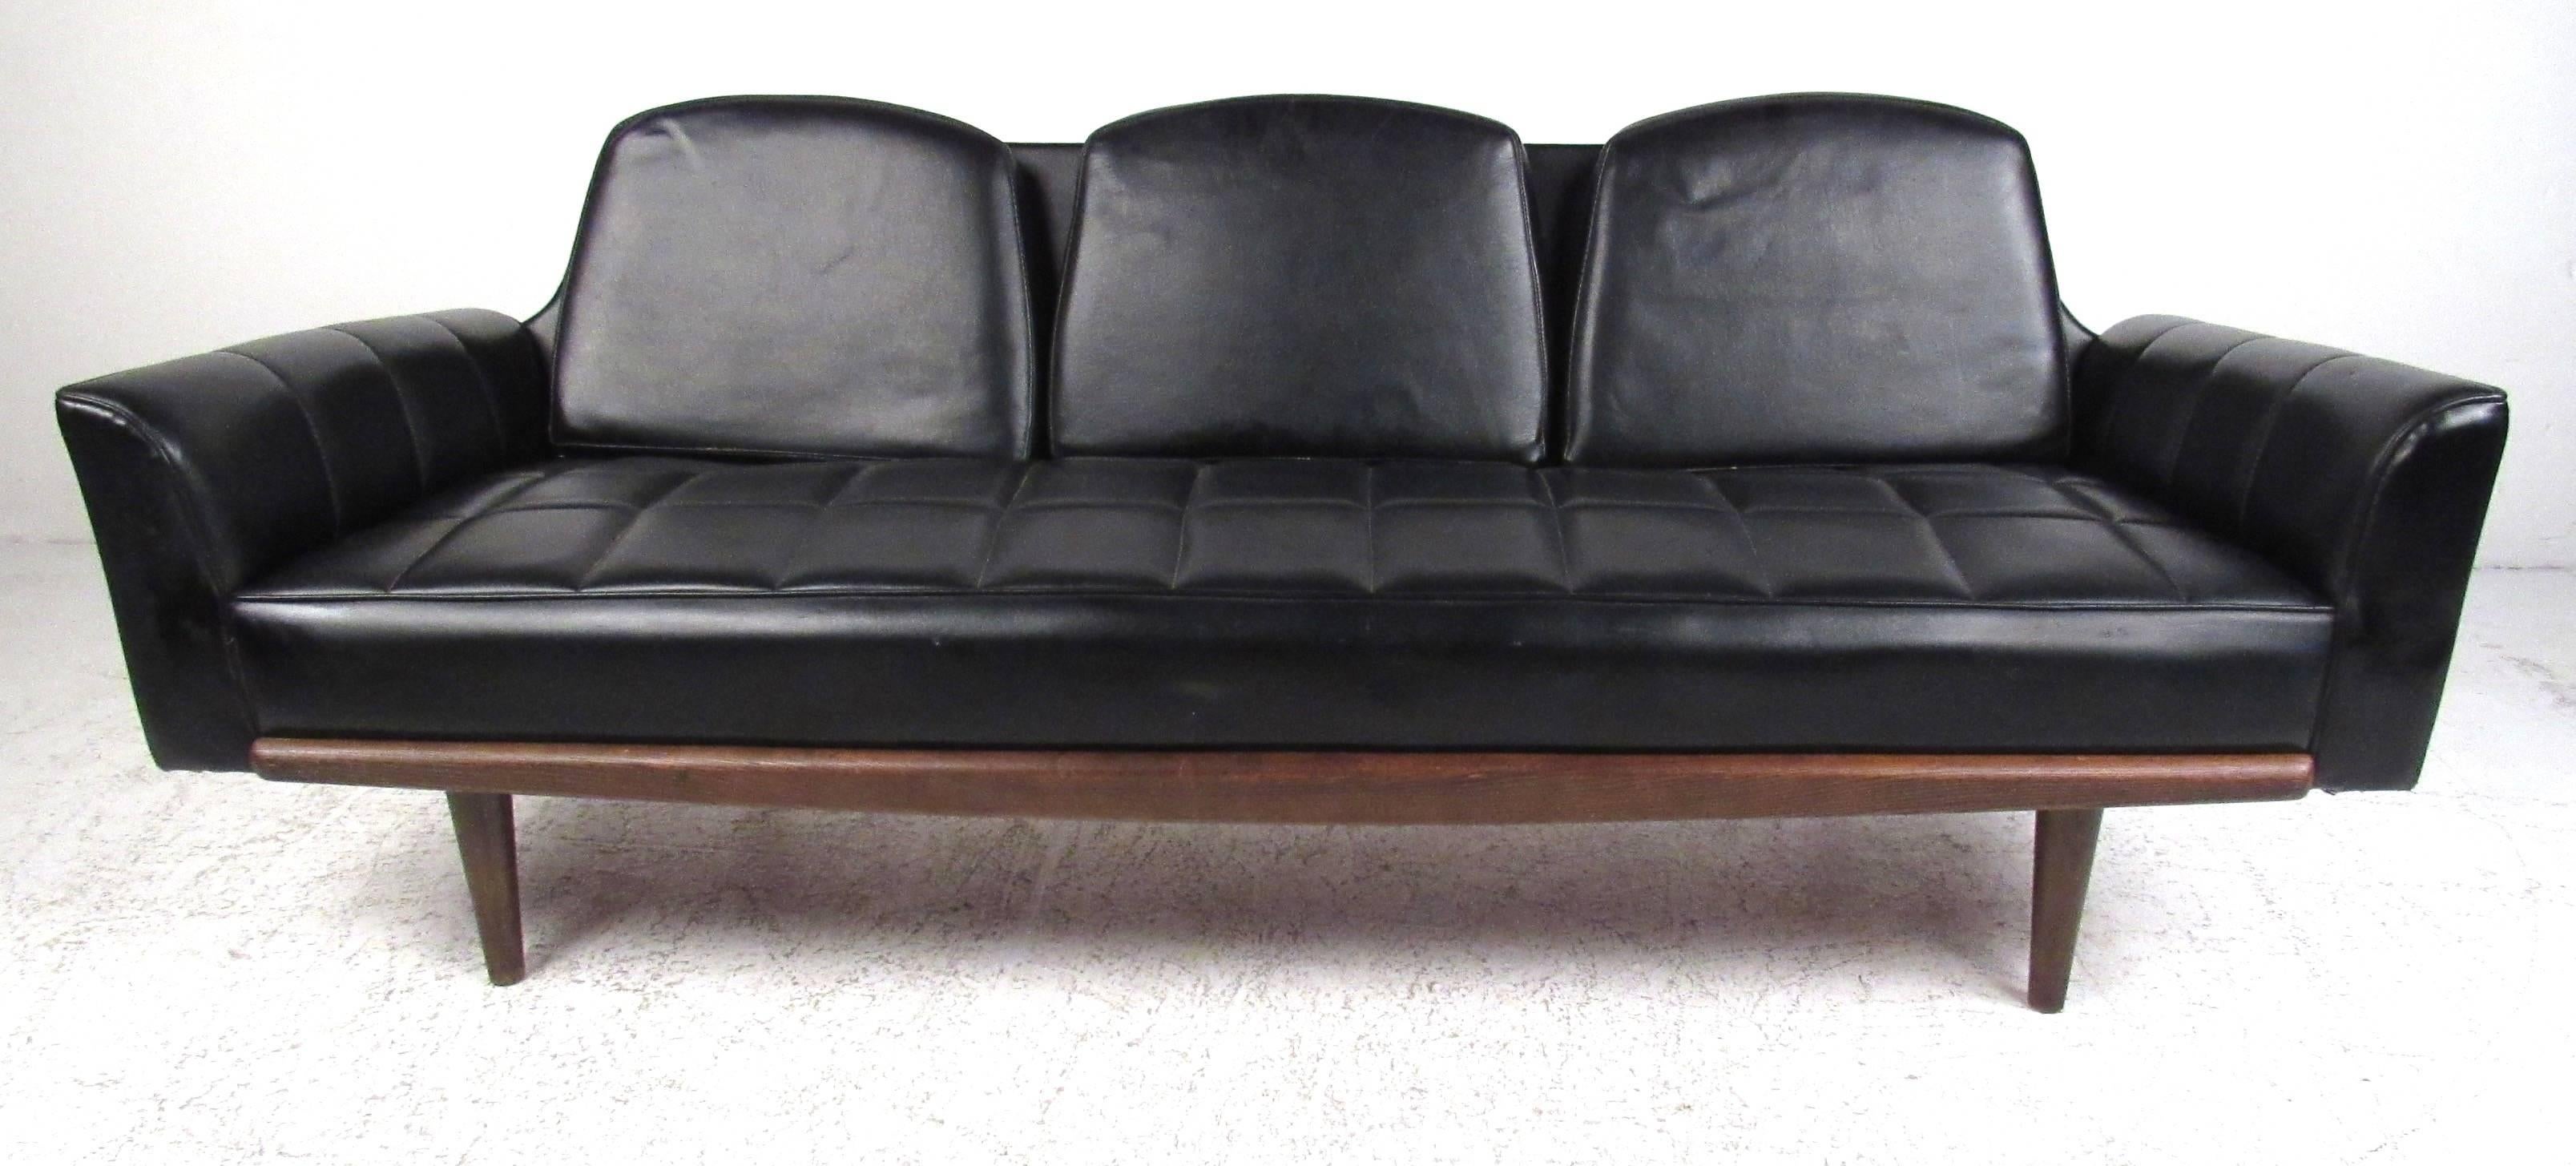 Classic midcentury black vinyl sofa featuring a grid tufted pattern across the seats and arms. Oak trim
compliments the base with tapered wood legs in front and sculptural legs in the back. The lower profile makes
it perfect for a smaller modern